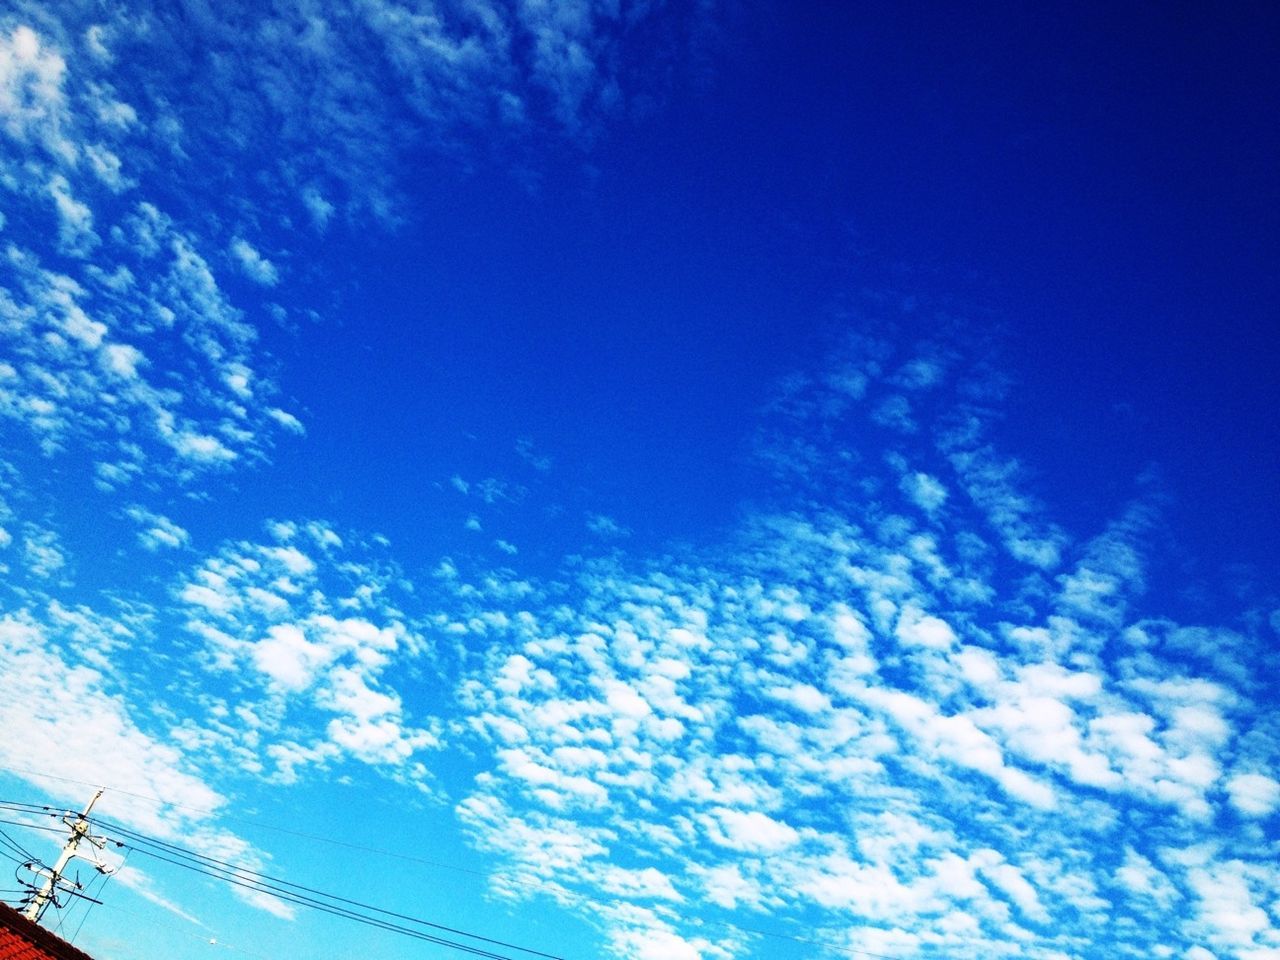 blue, low angle view, sky, cloud - sky, power line, cloud, beauty in nature, tranquility, nature, electricity, scenics, outdoors, cable, cloudy, no people, day, tranquil scene, connection, power supply, sunlight